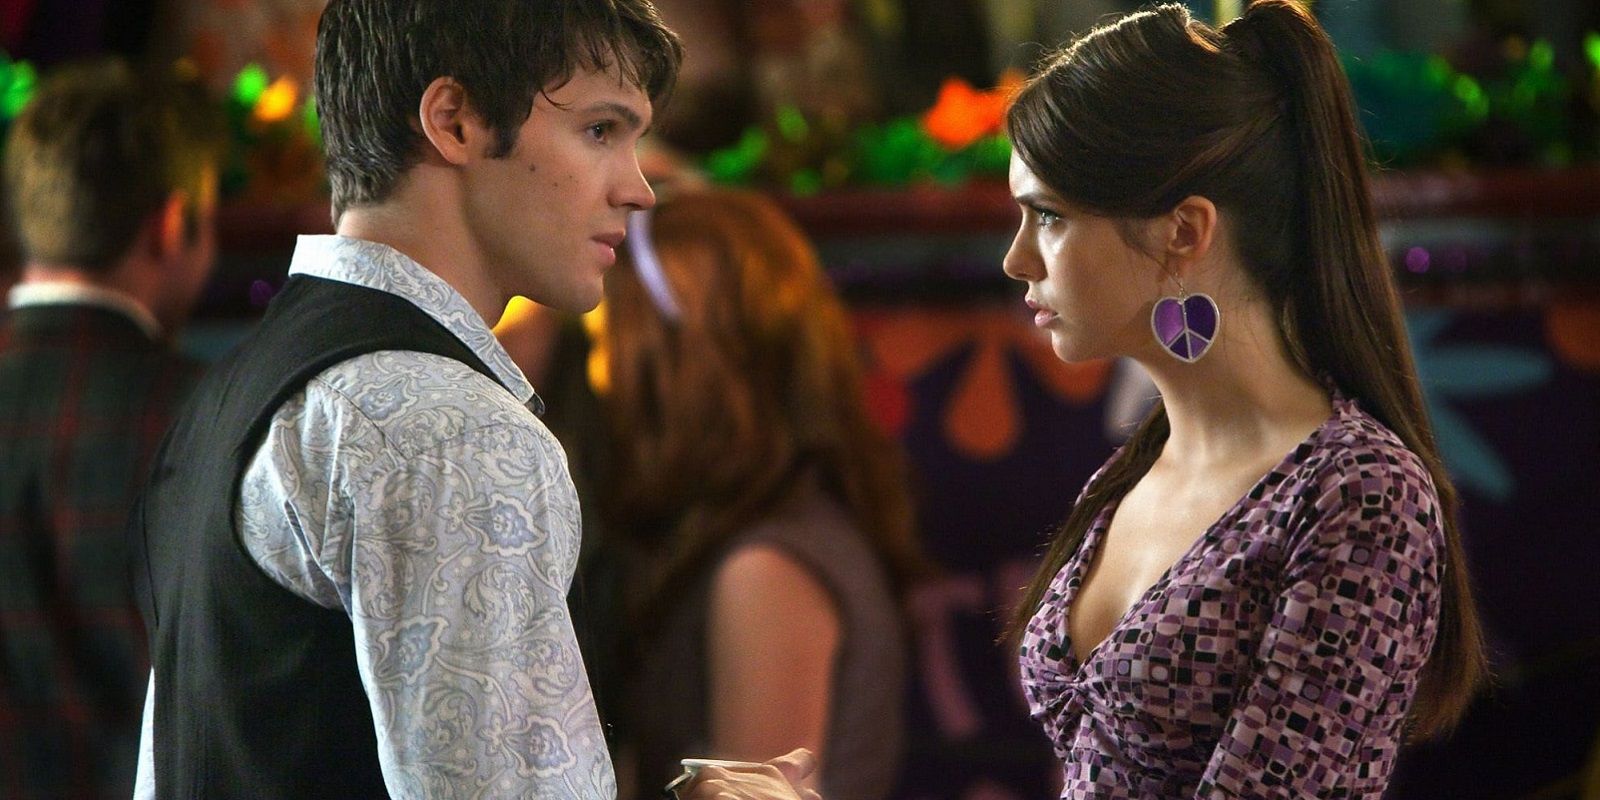 Jeremy and Elena talking at the school dance in The Vampire Diaries.